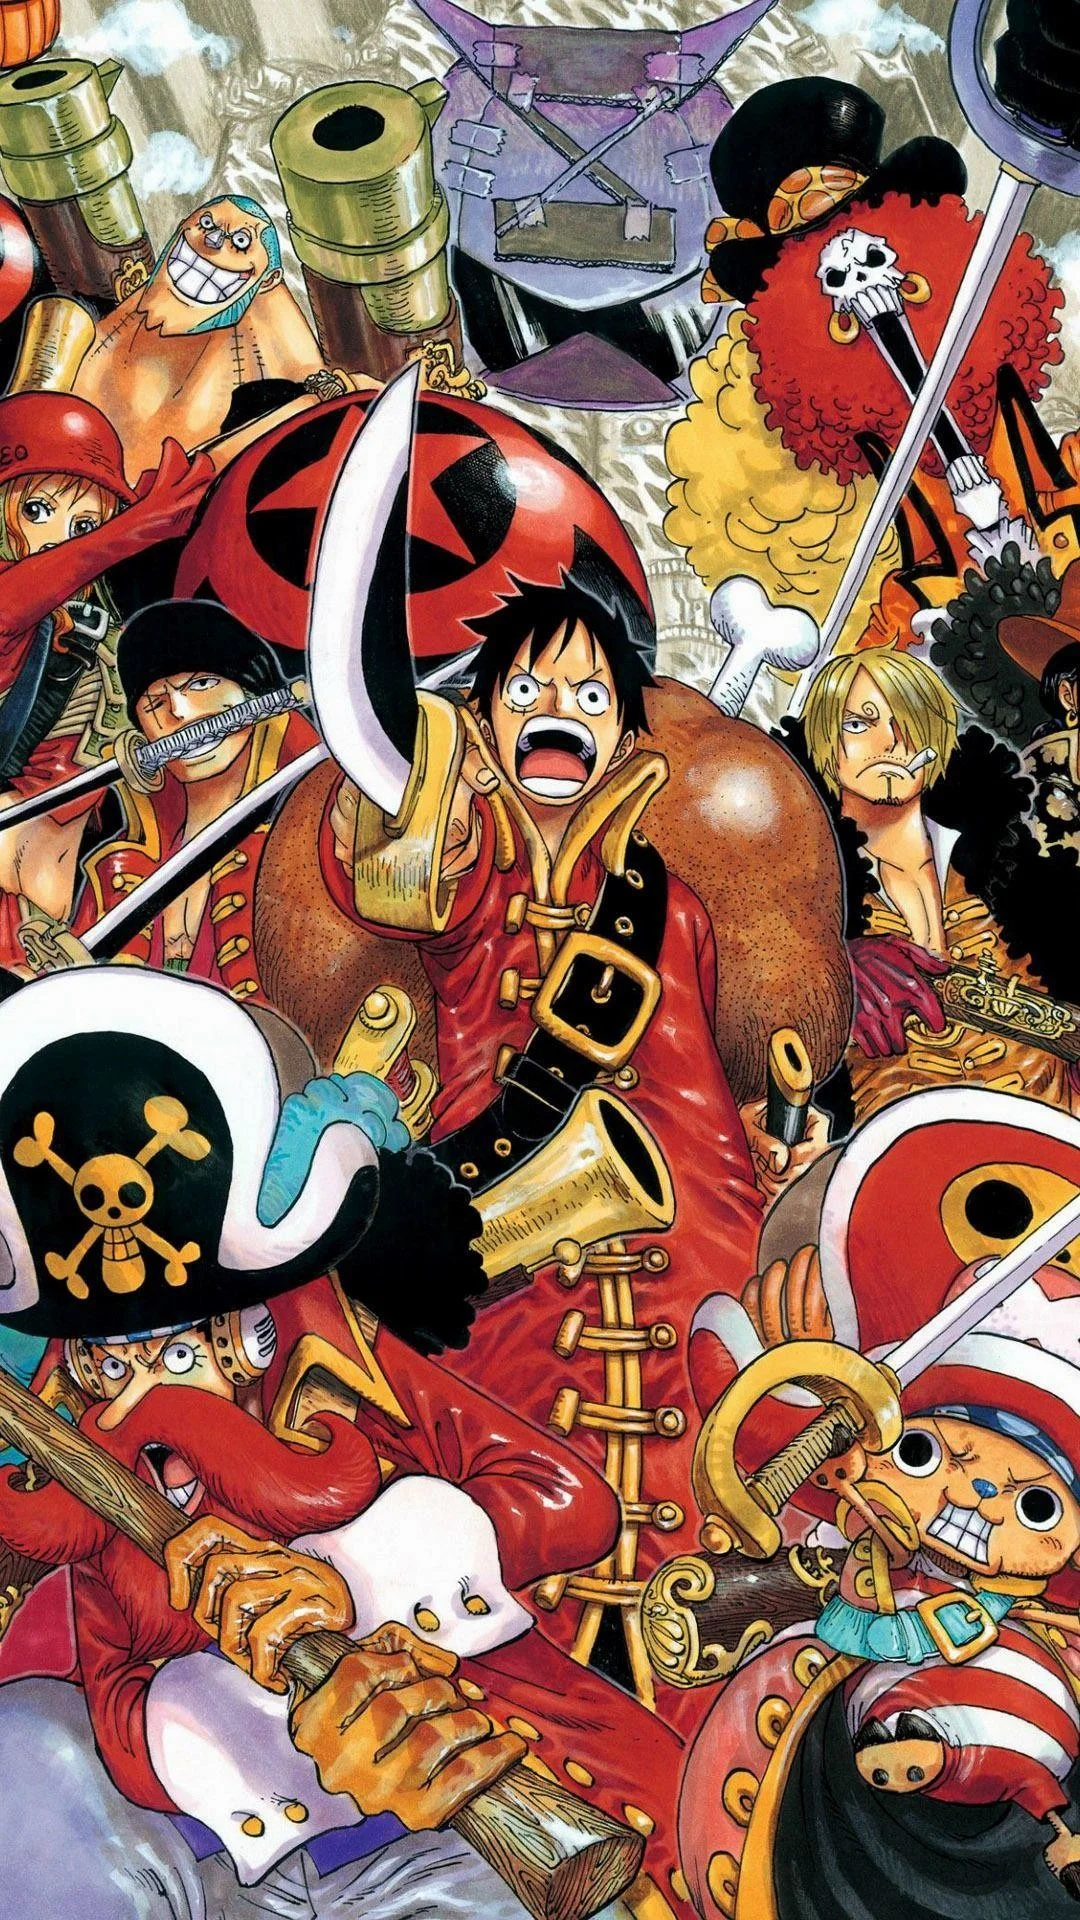 Wallpaper.wiki Download One Piece Iphone Background Free